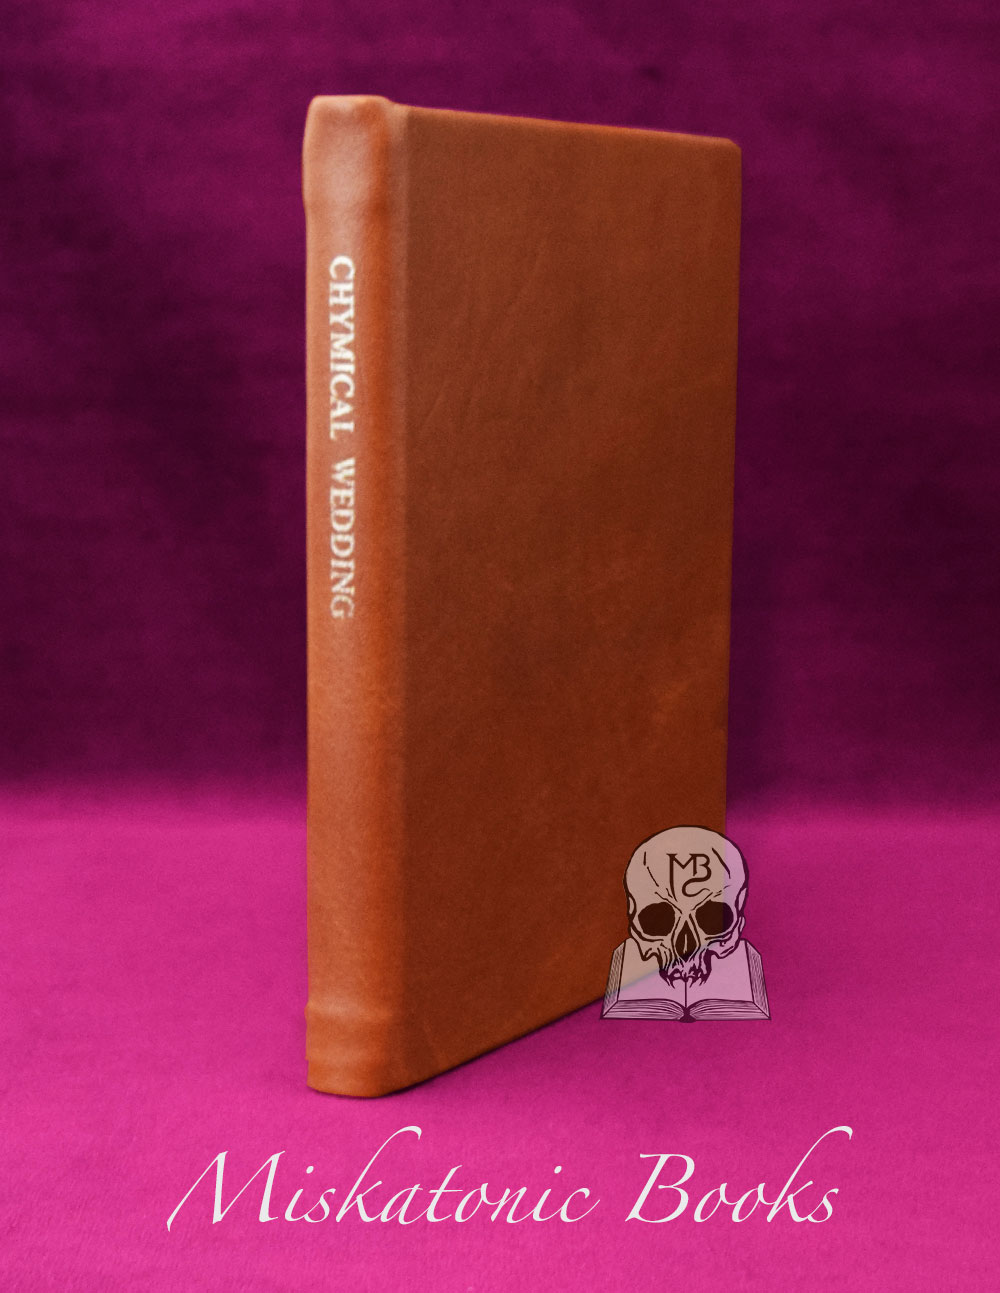 A COMMENTARY ON THE CHEMICAL WEDDING  Edited with an Introduction and Commentary by Adam McLean - Limited Edition Hardcover